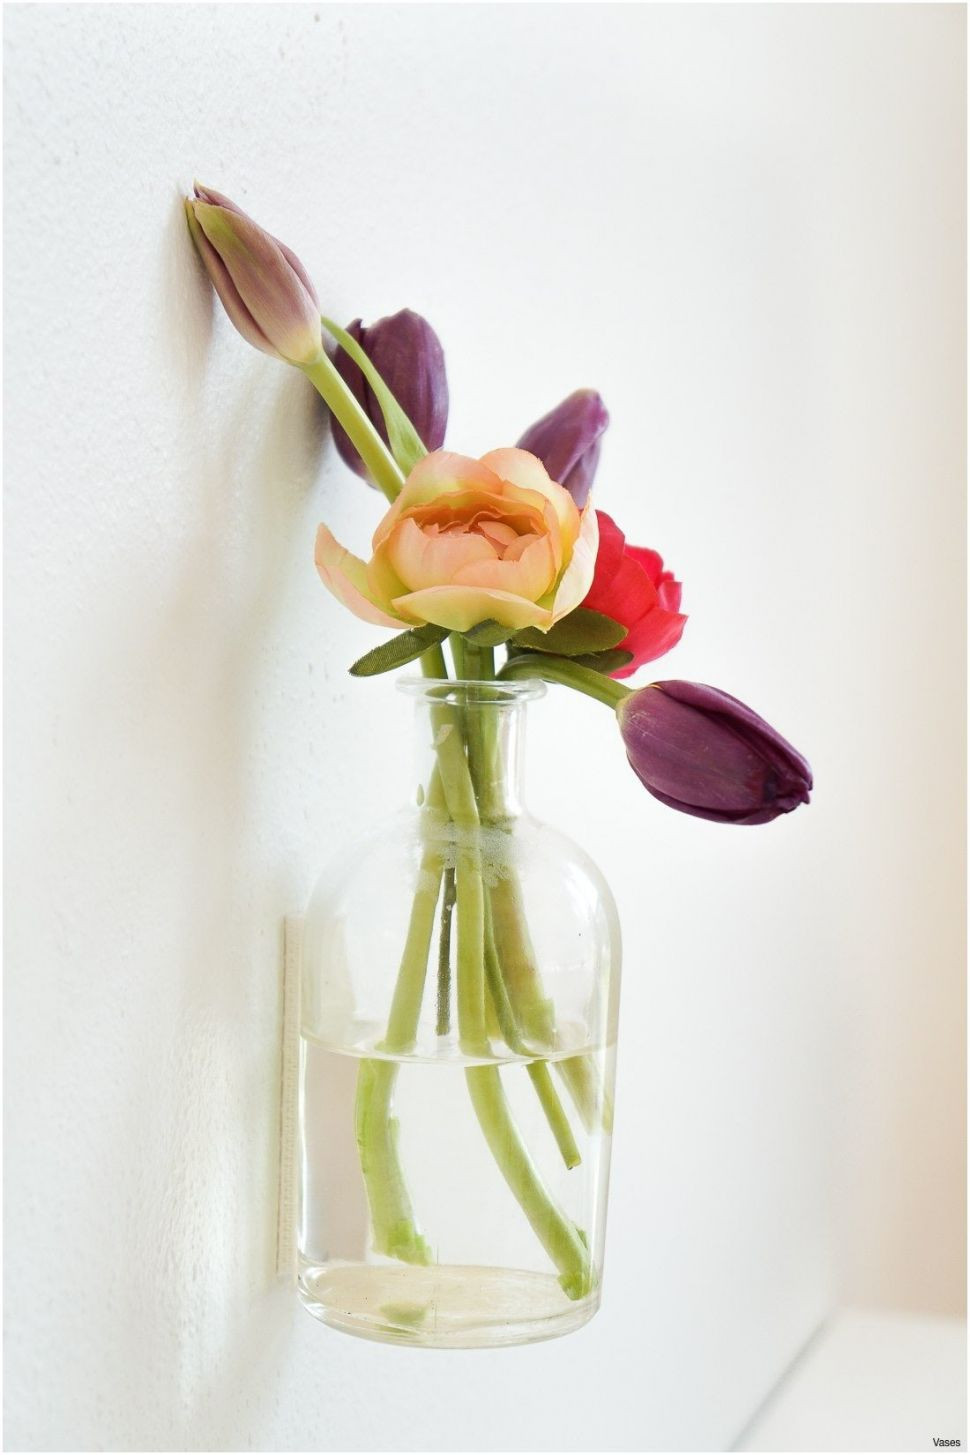 marquis by waterford versa vase of vases artificial plants collection page 10 regarding wall vases for flowers photograph decorative rose petals excellent il fullxfull l7e9h vases wall of wall vases for flowers